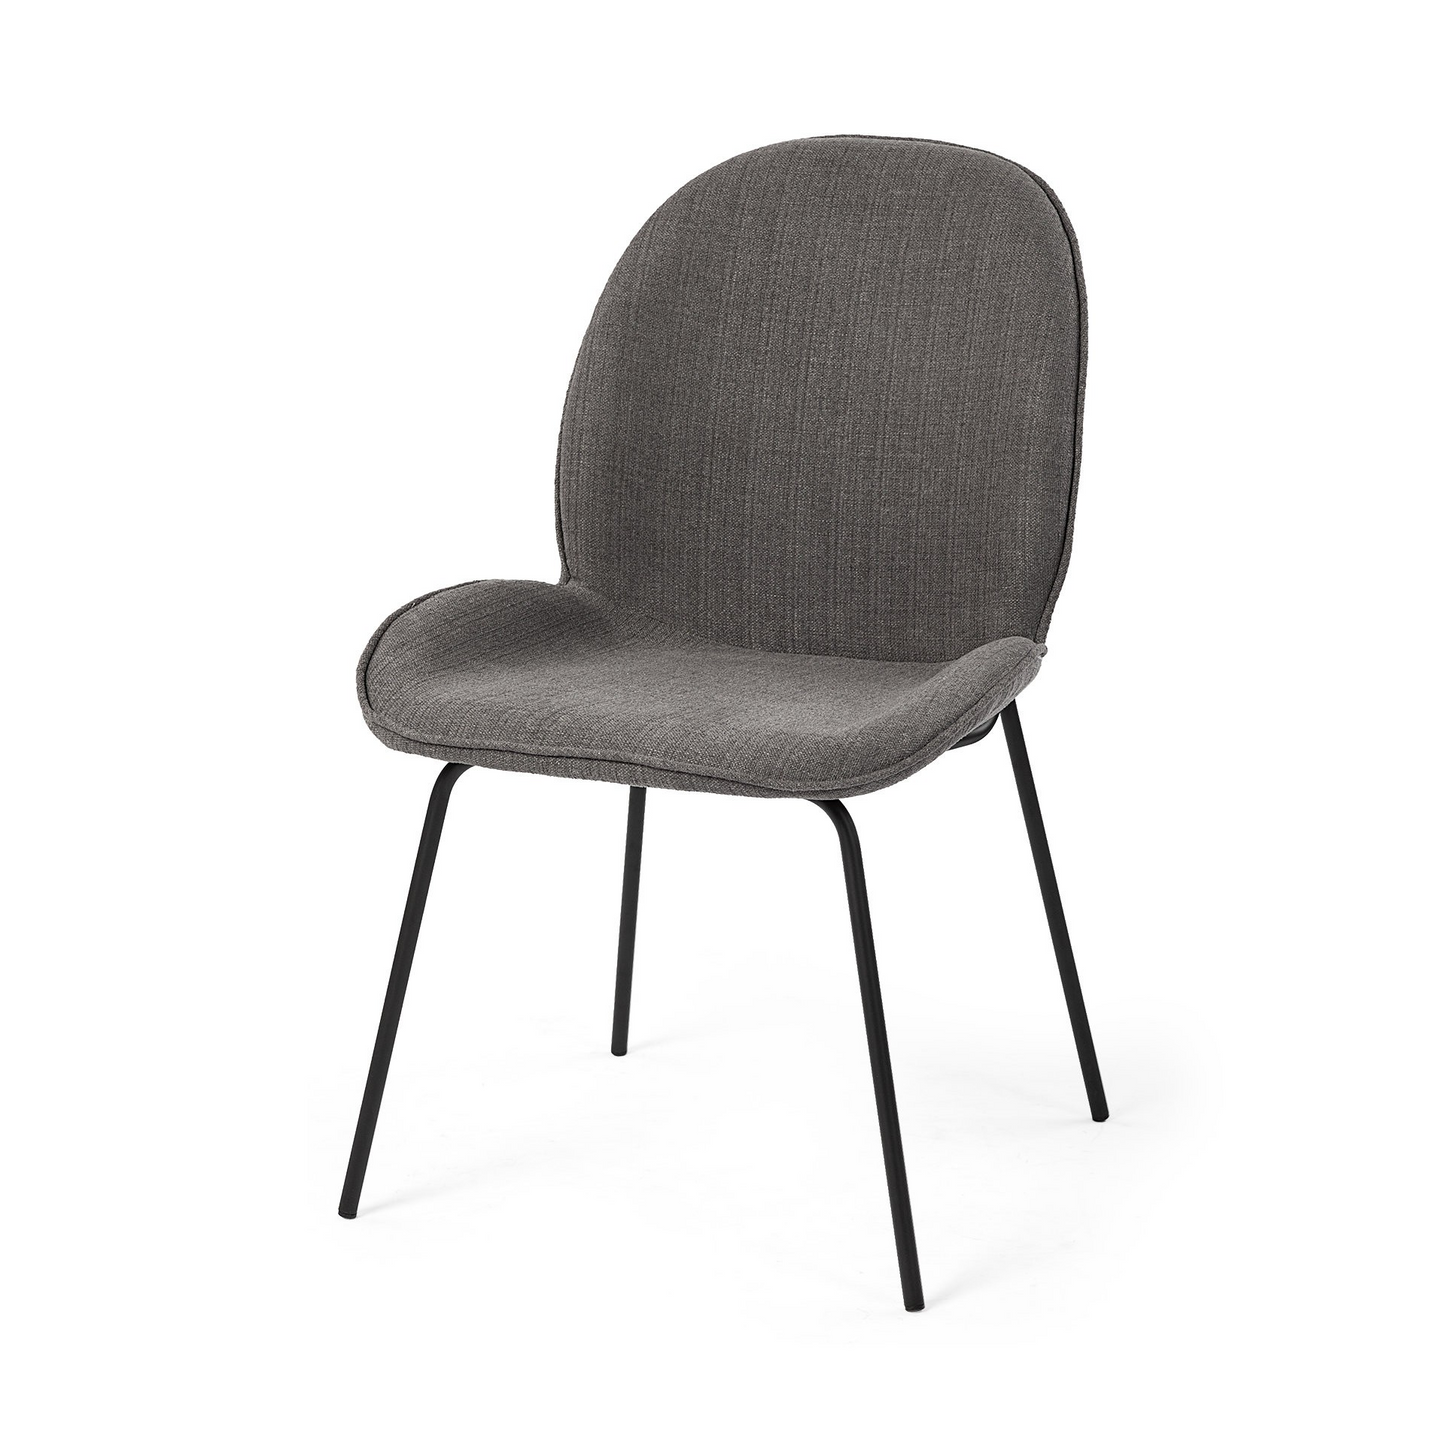 "Set Of Two Gray And Black Upholstered Fabric Side Chairs"